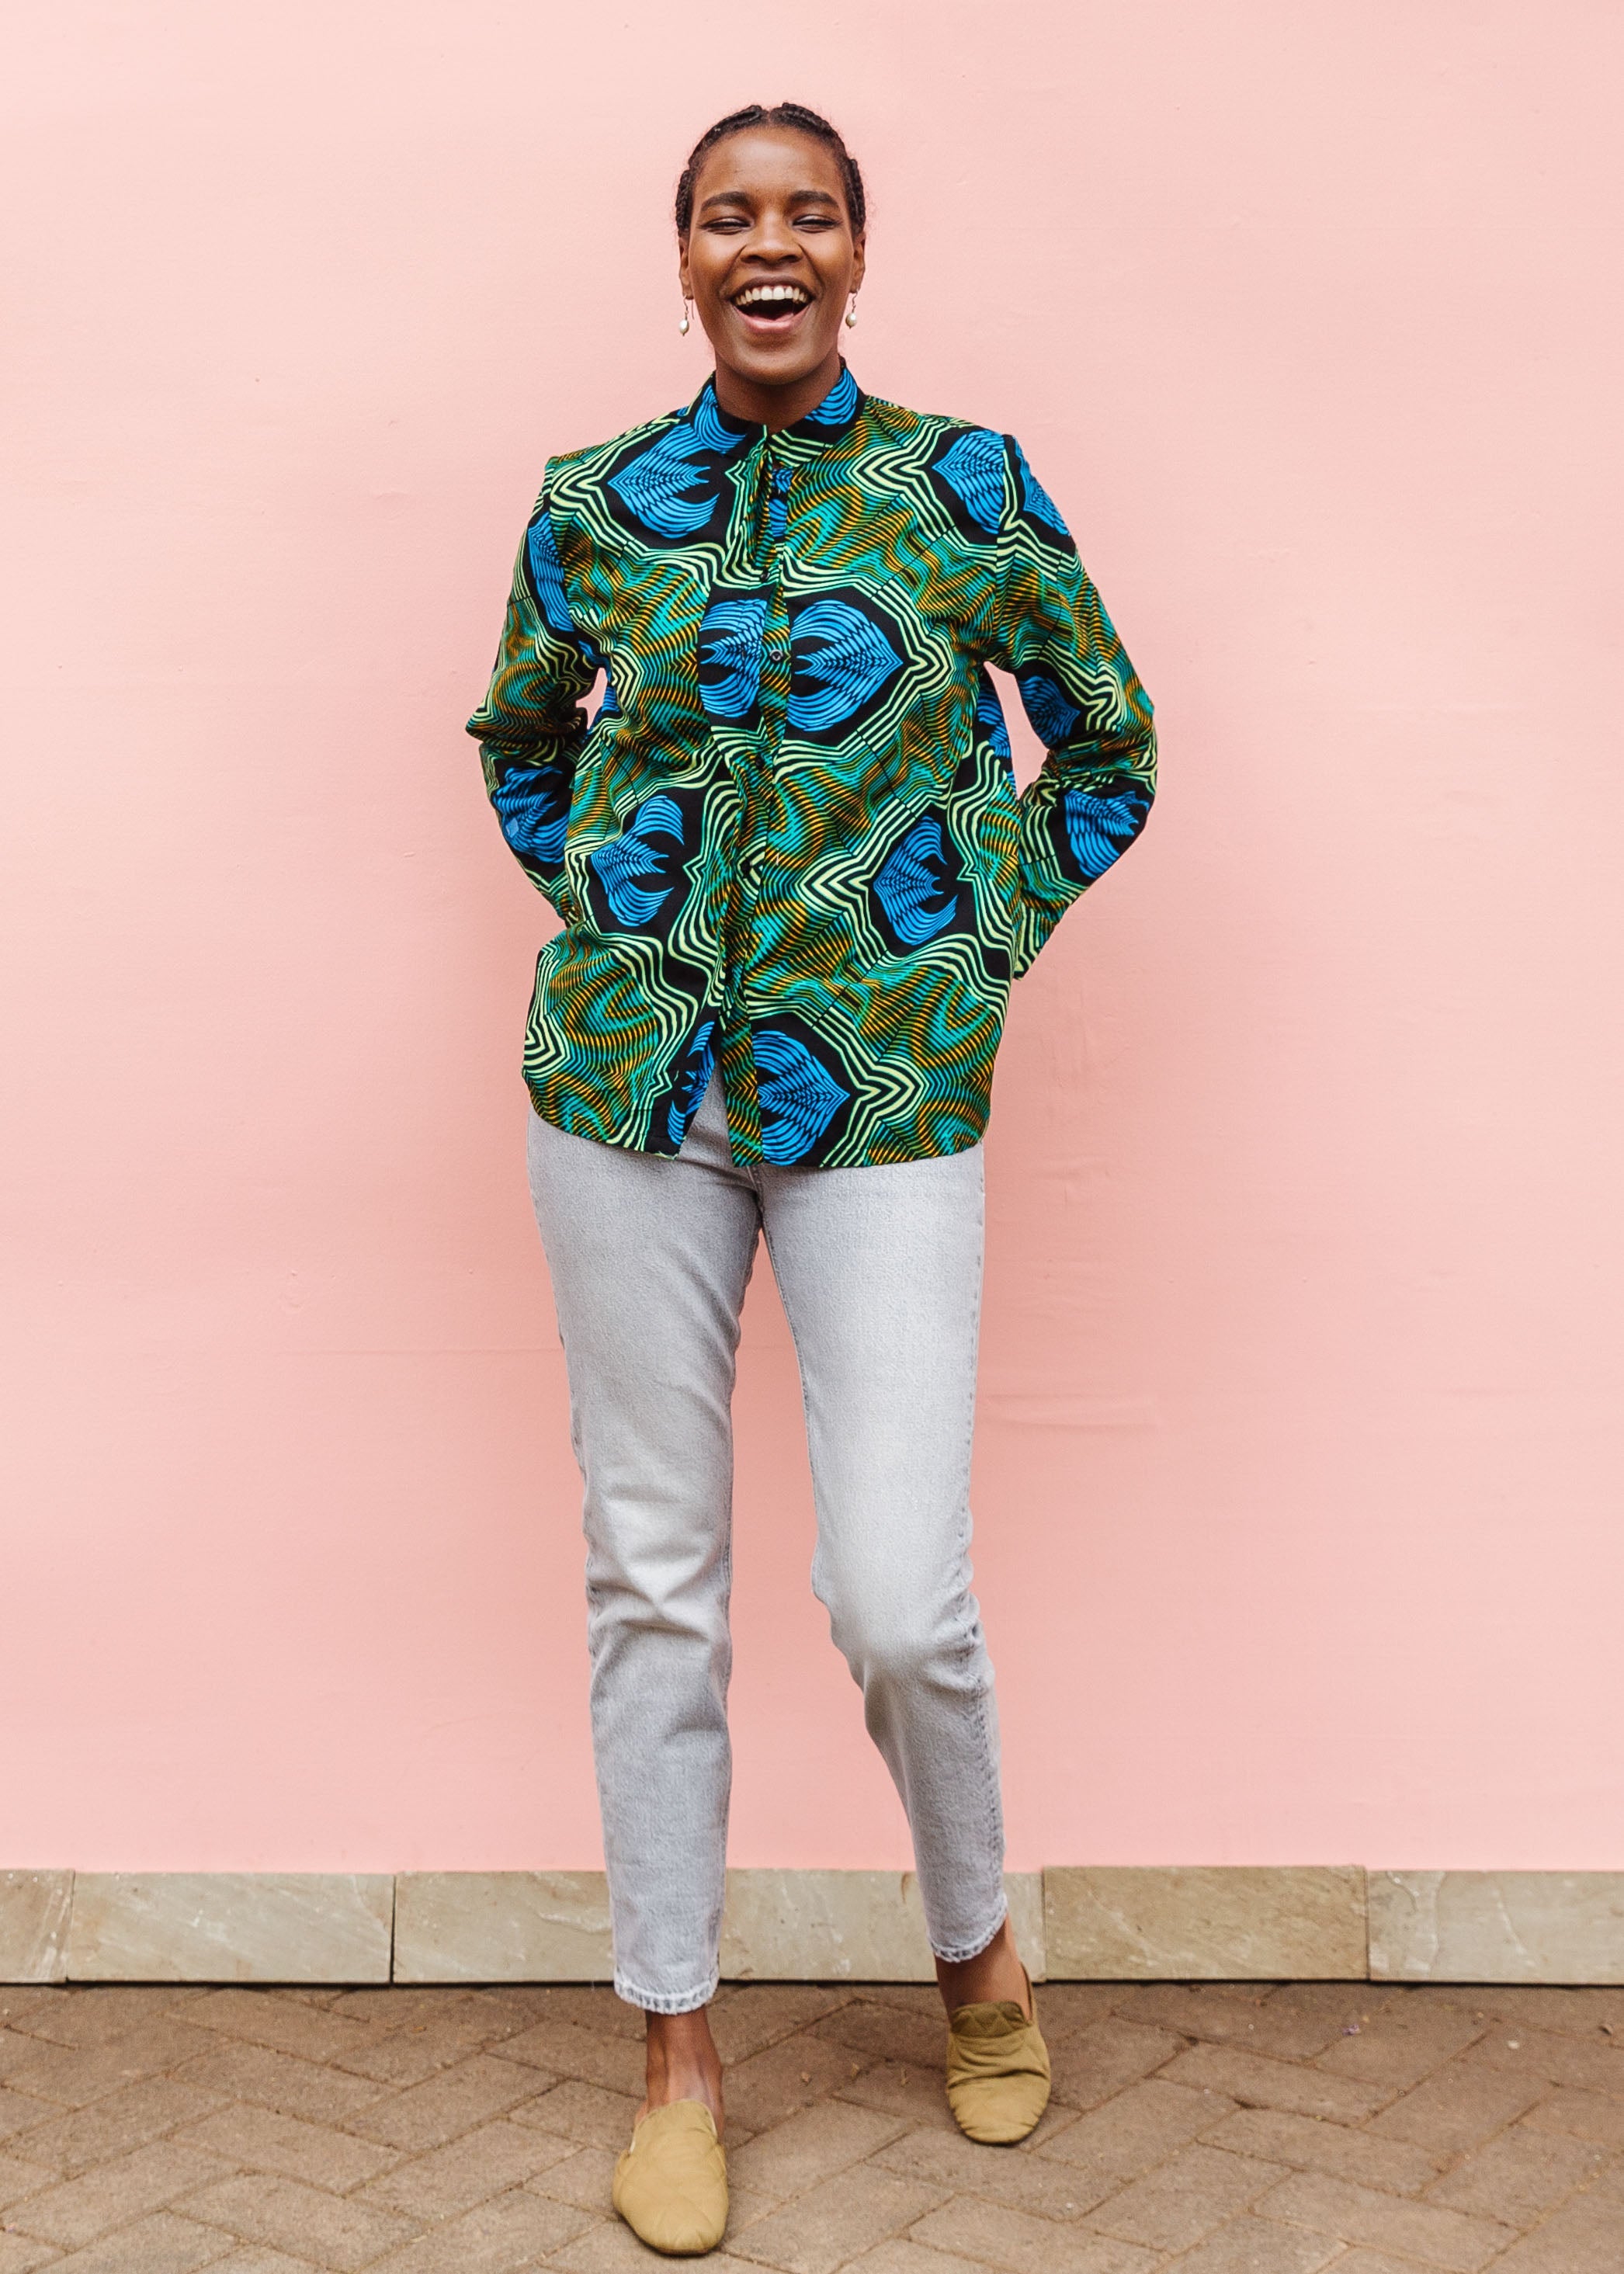 Model wearing long sleeve blouse with blue and green abstract vibration print.